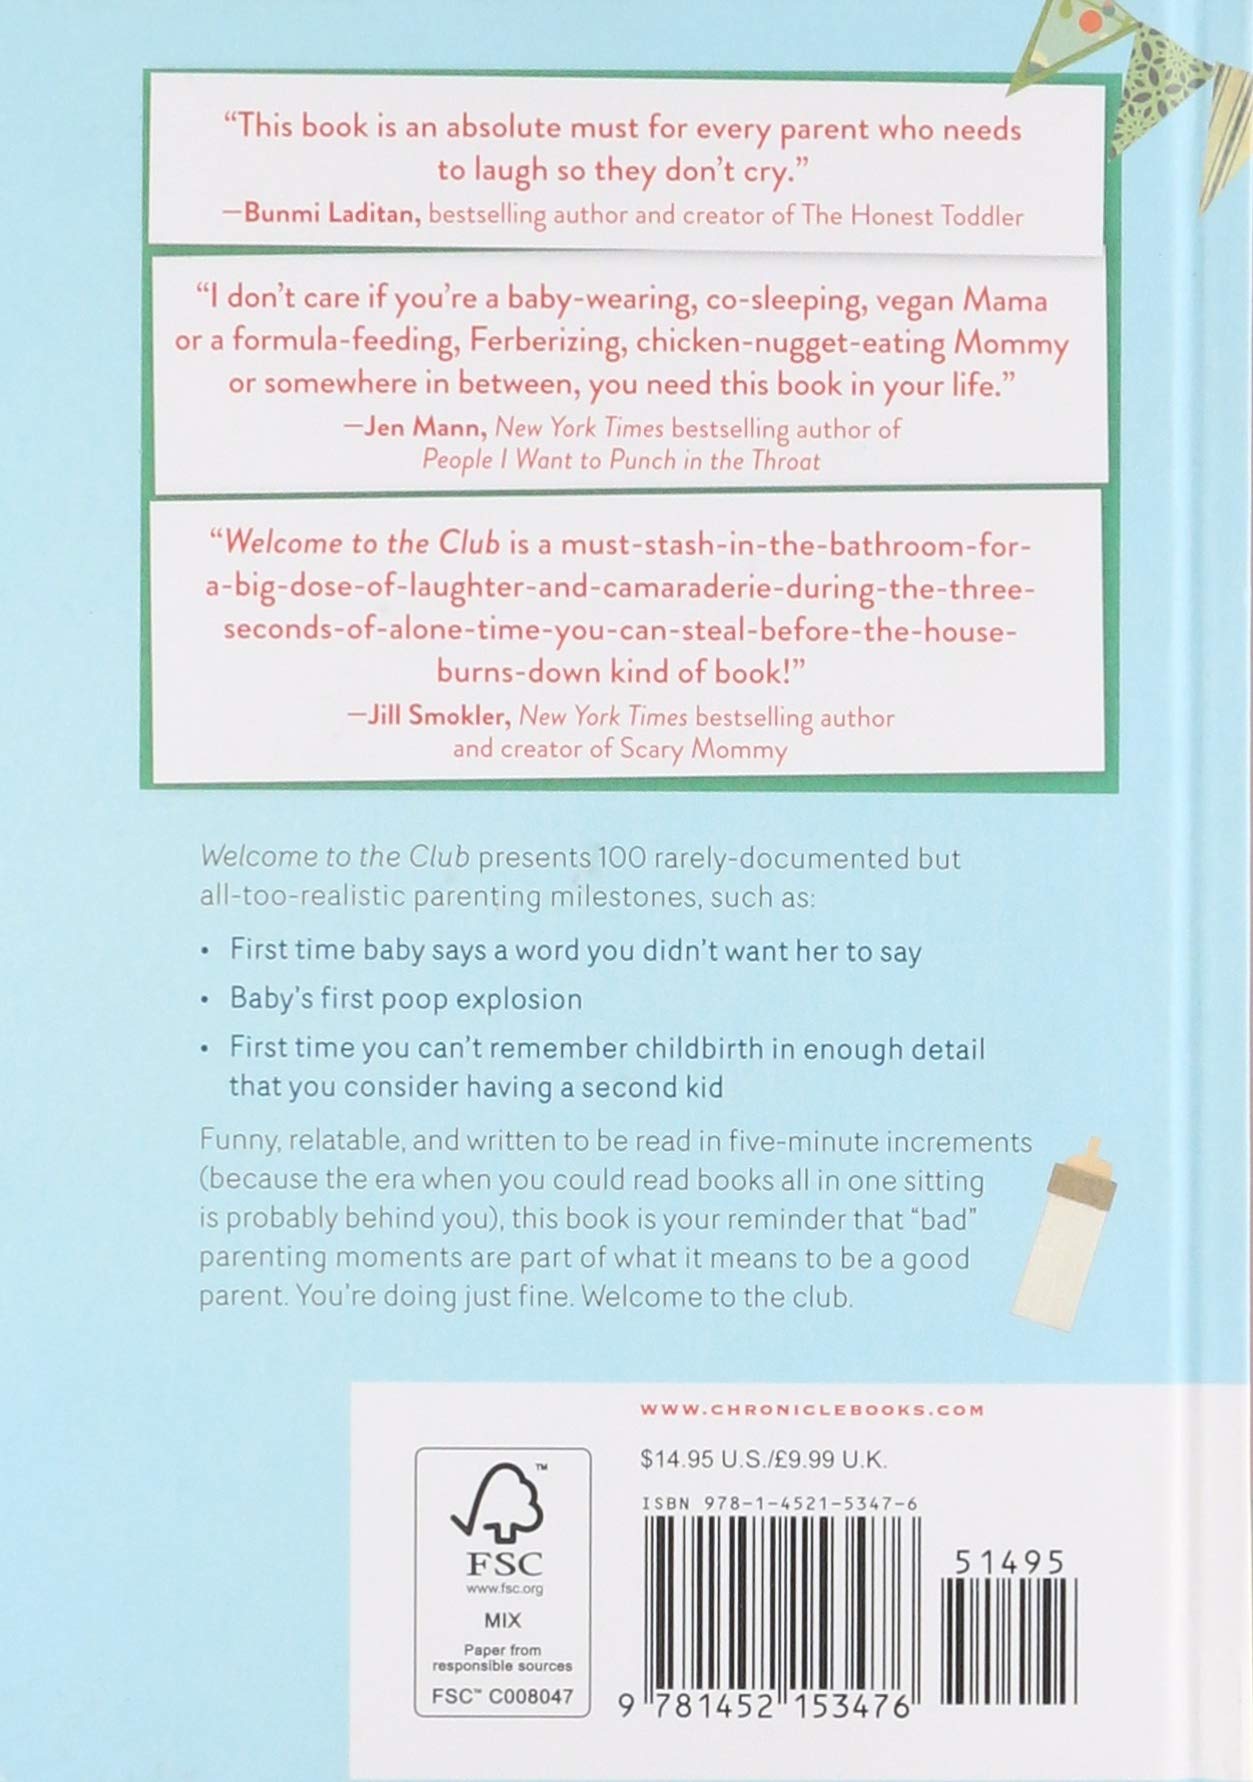 back cover of book with text